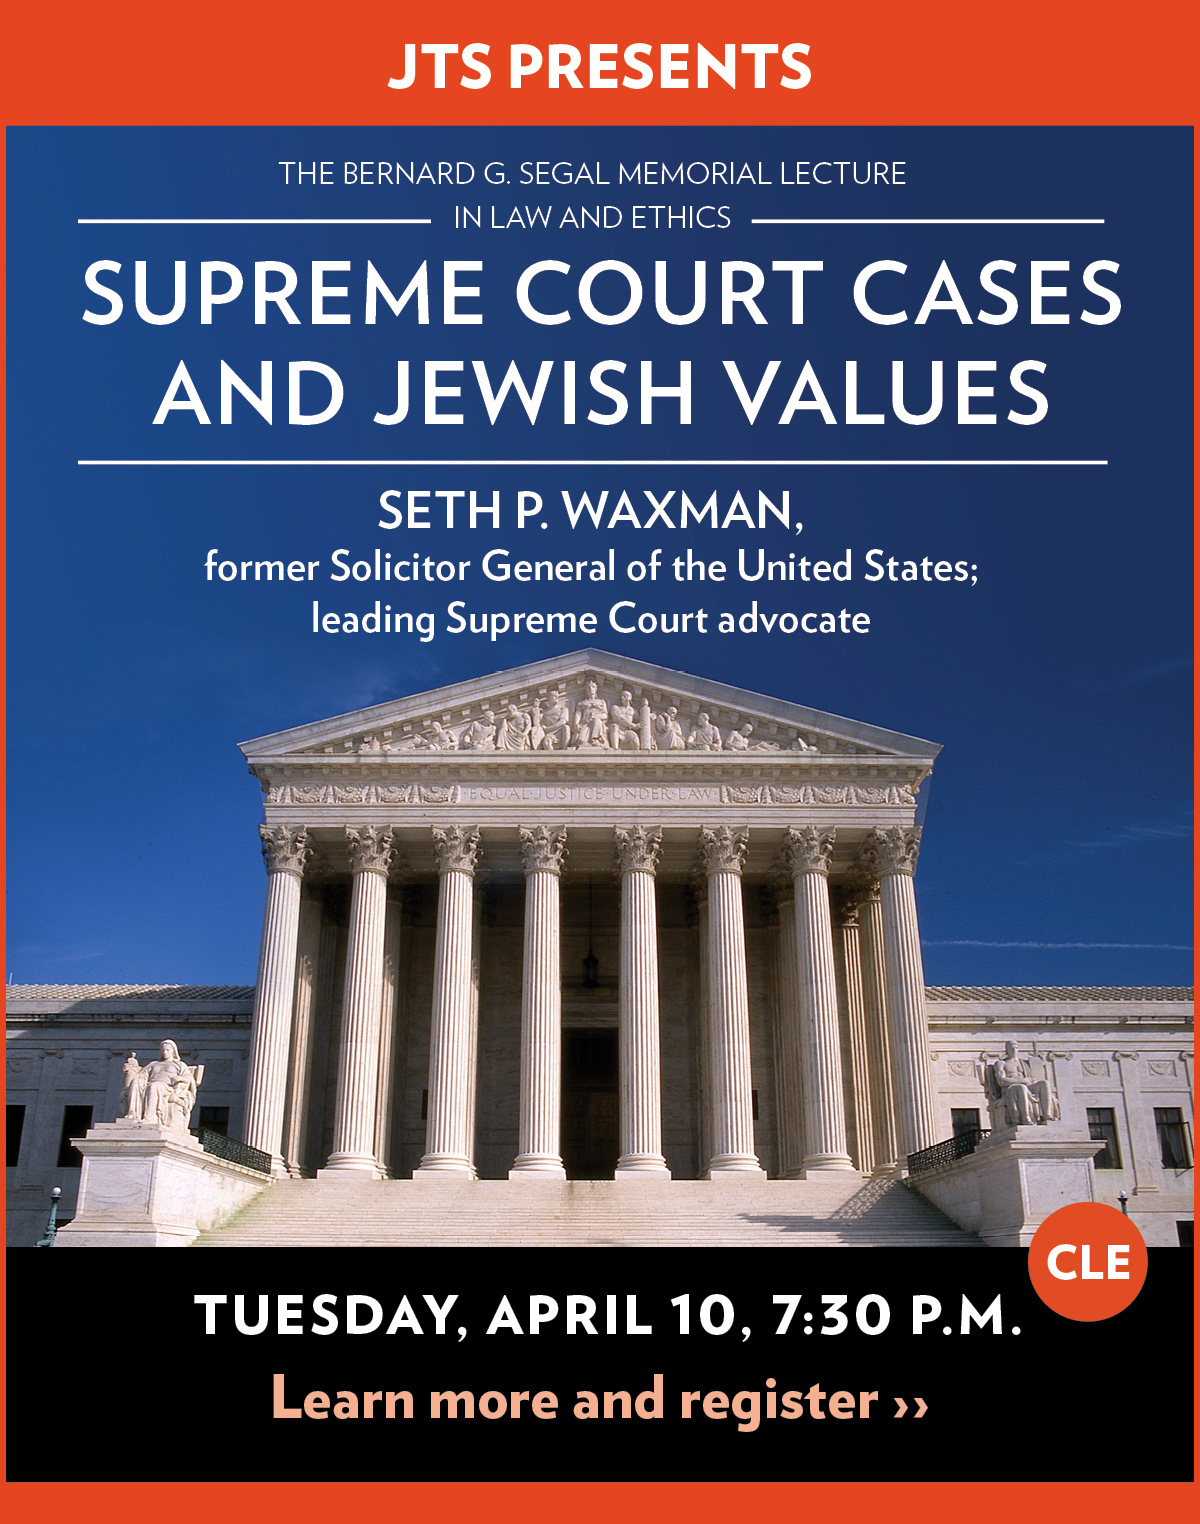 Supreme Court Cases and Jewish Values - Tuesday, April 10, 2018, 7:30 p.m.